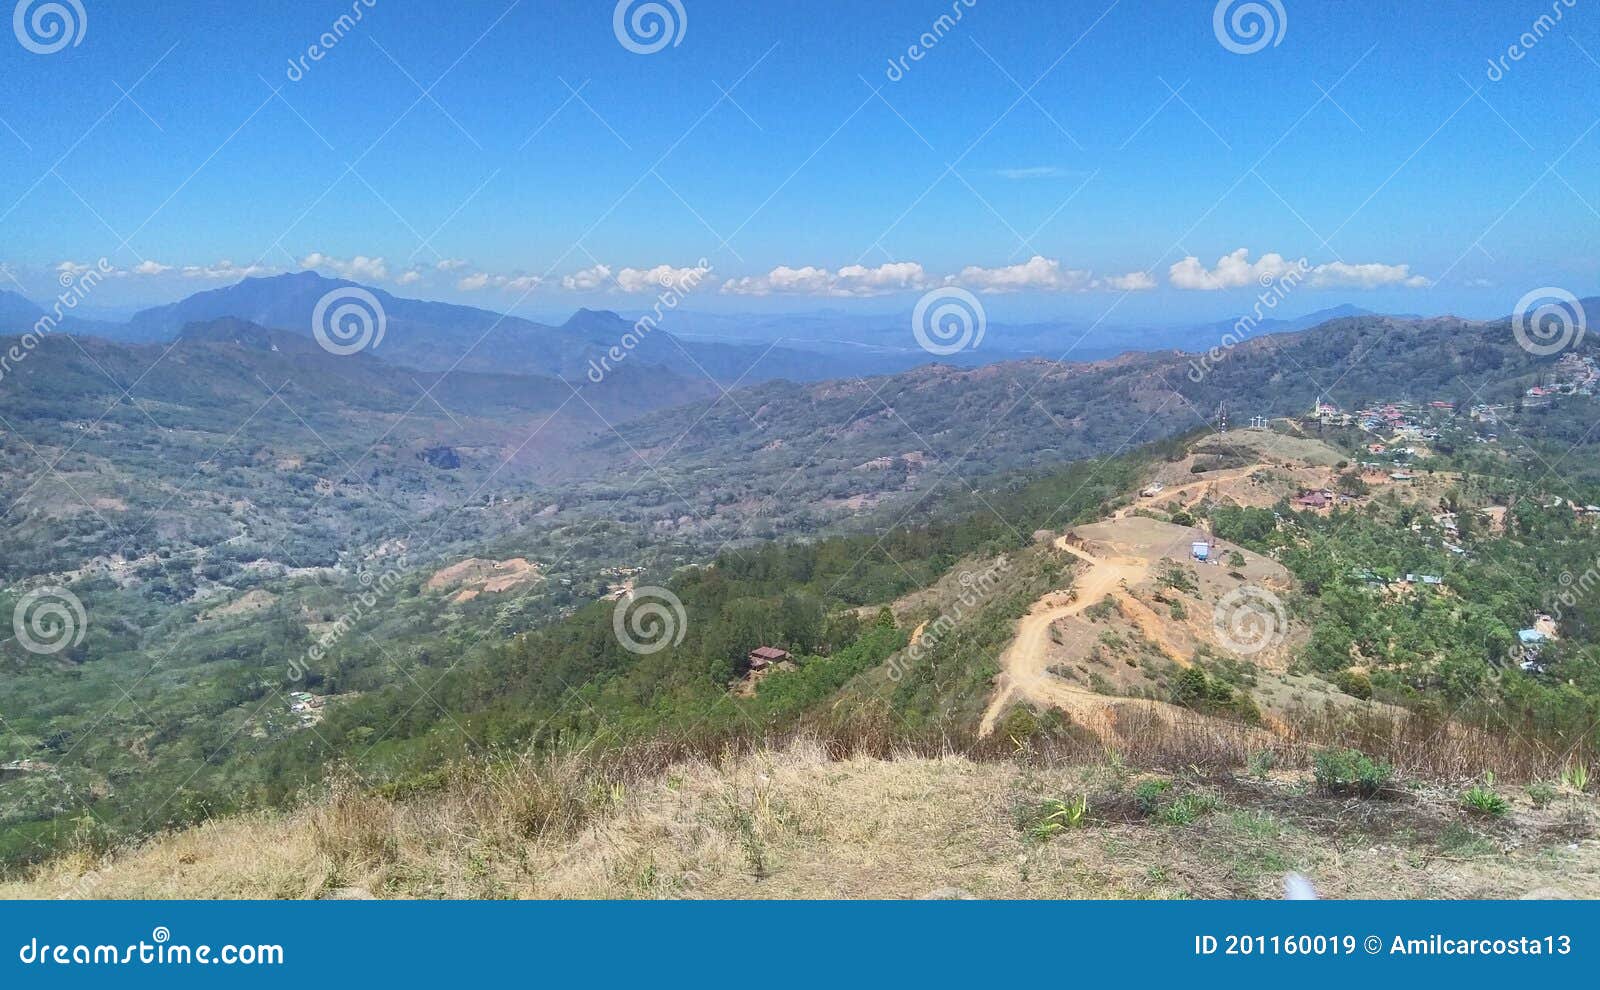 green hill view with blue sky in letefoho, timor-leste.